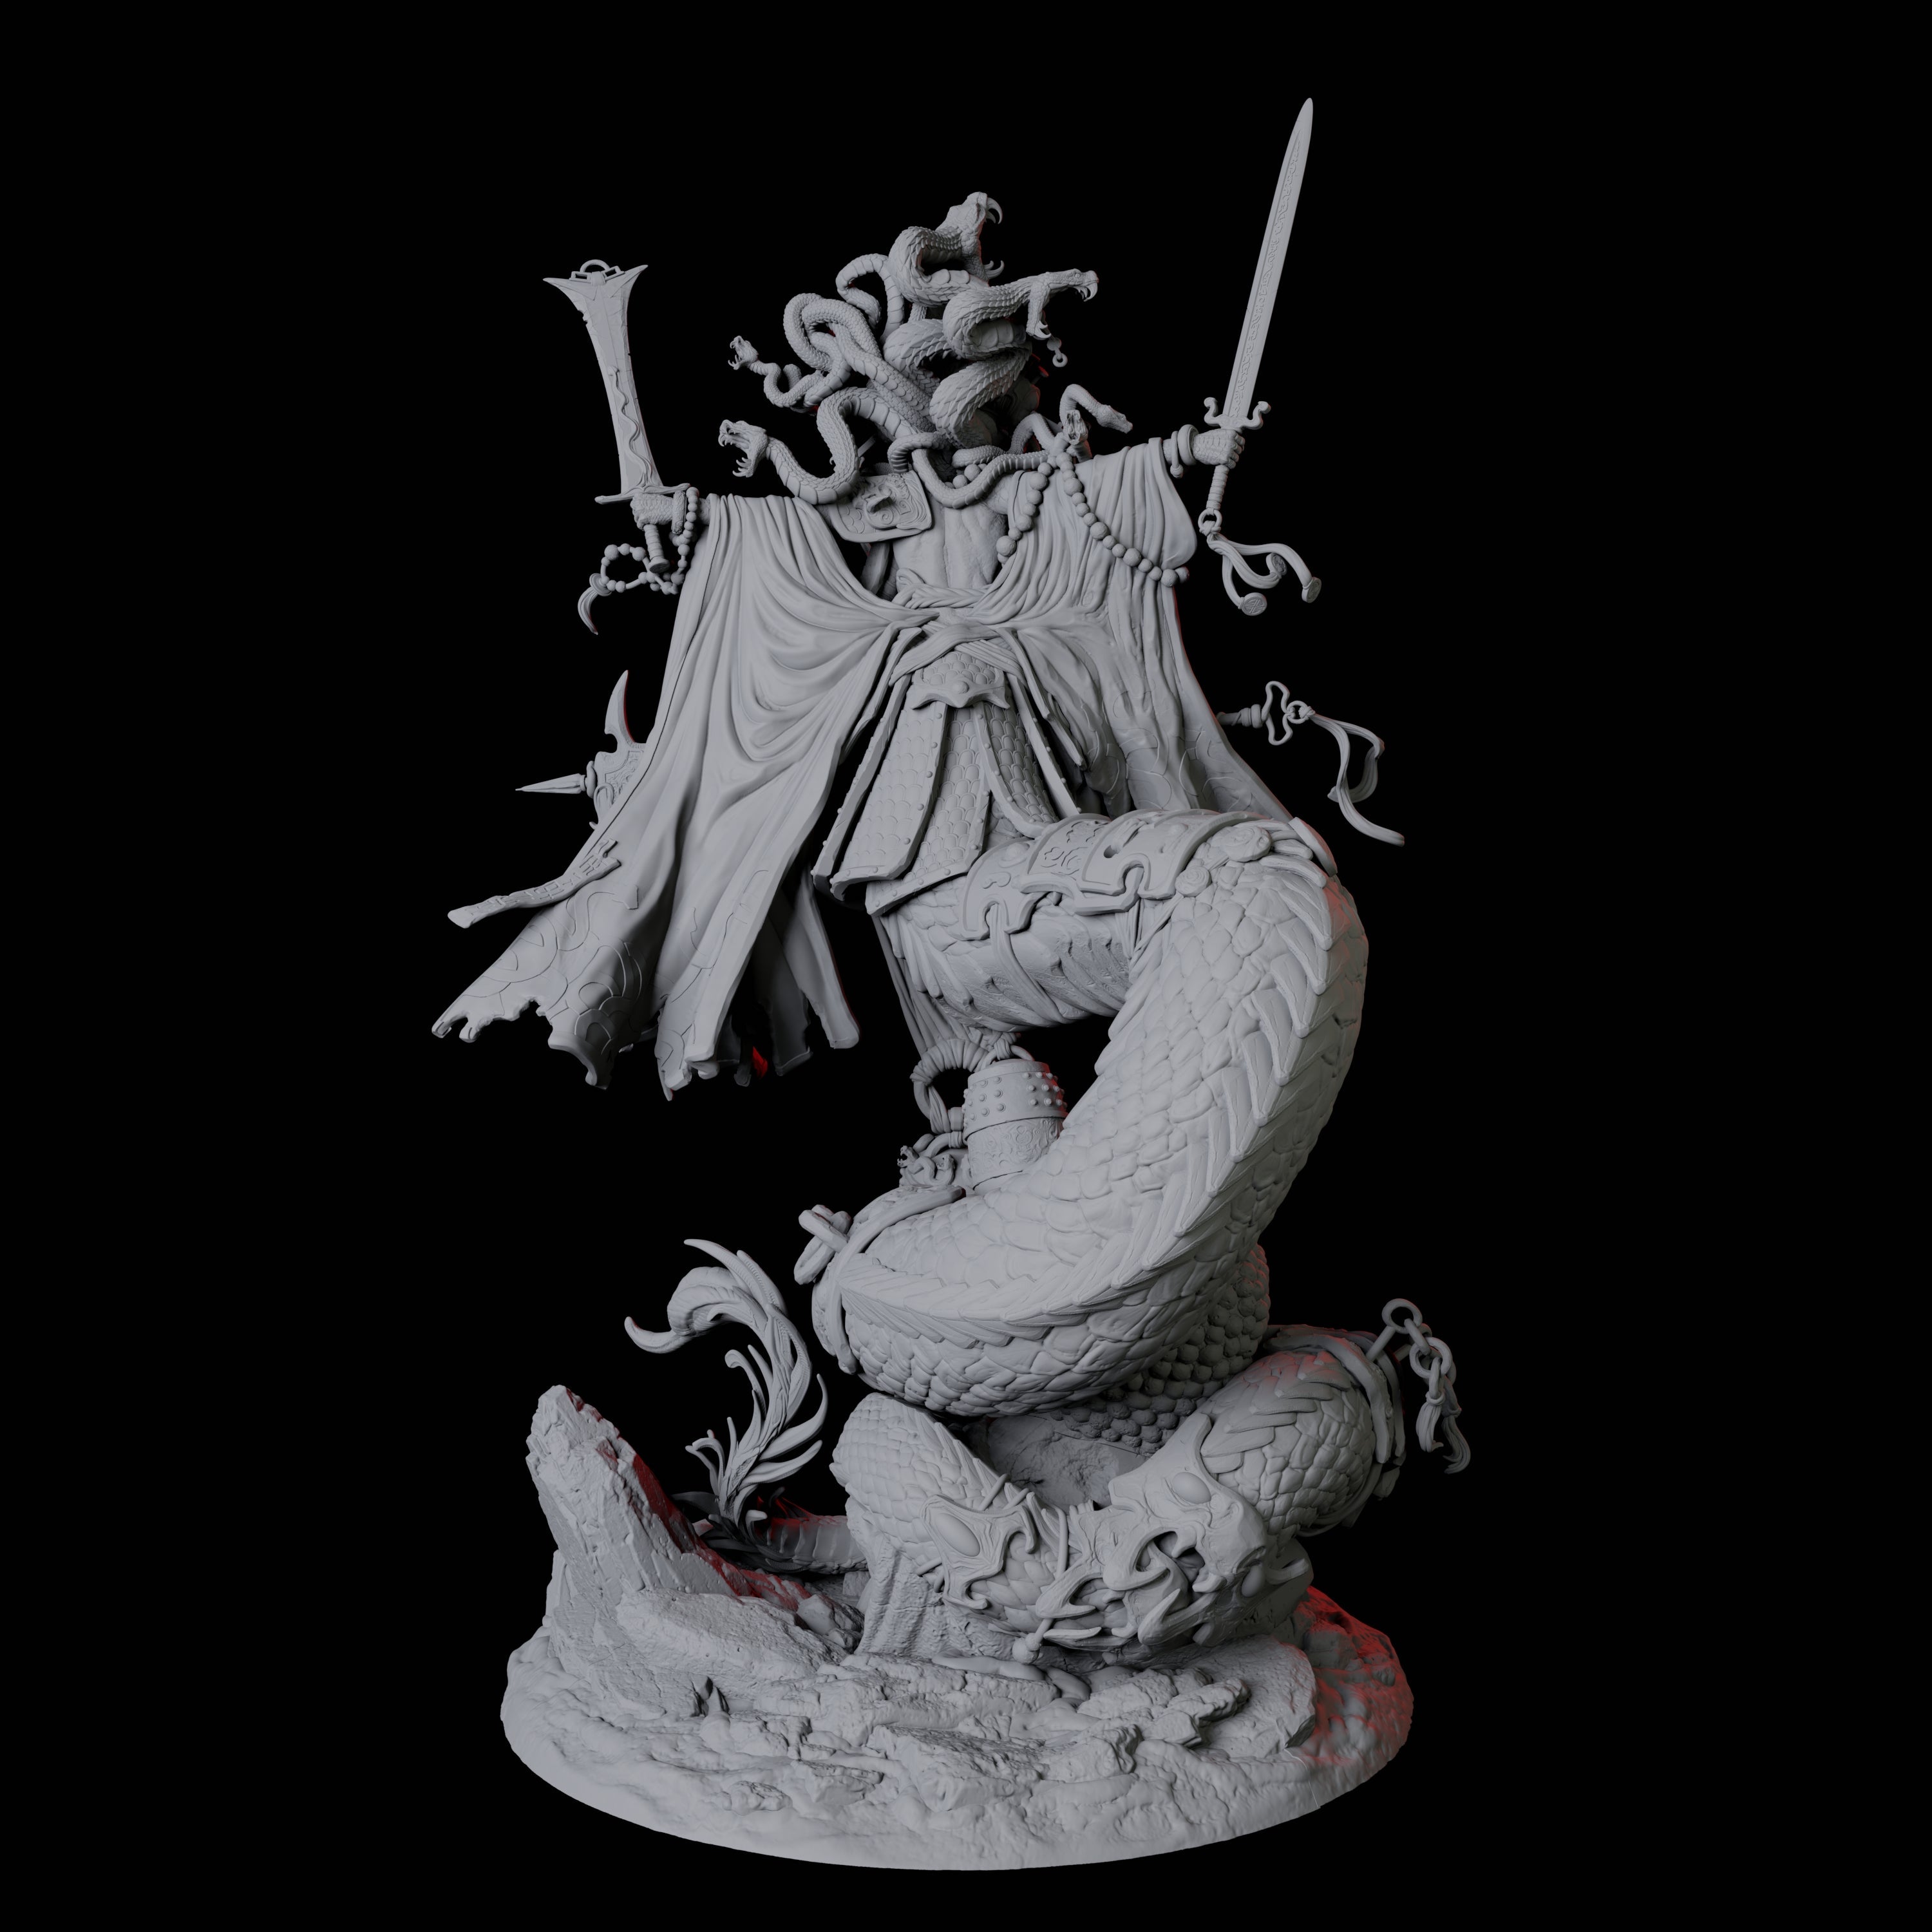 Mega Marilith Matriarch Miniature for Dungeons and Dragons, Pathfinder or other TTRPGs